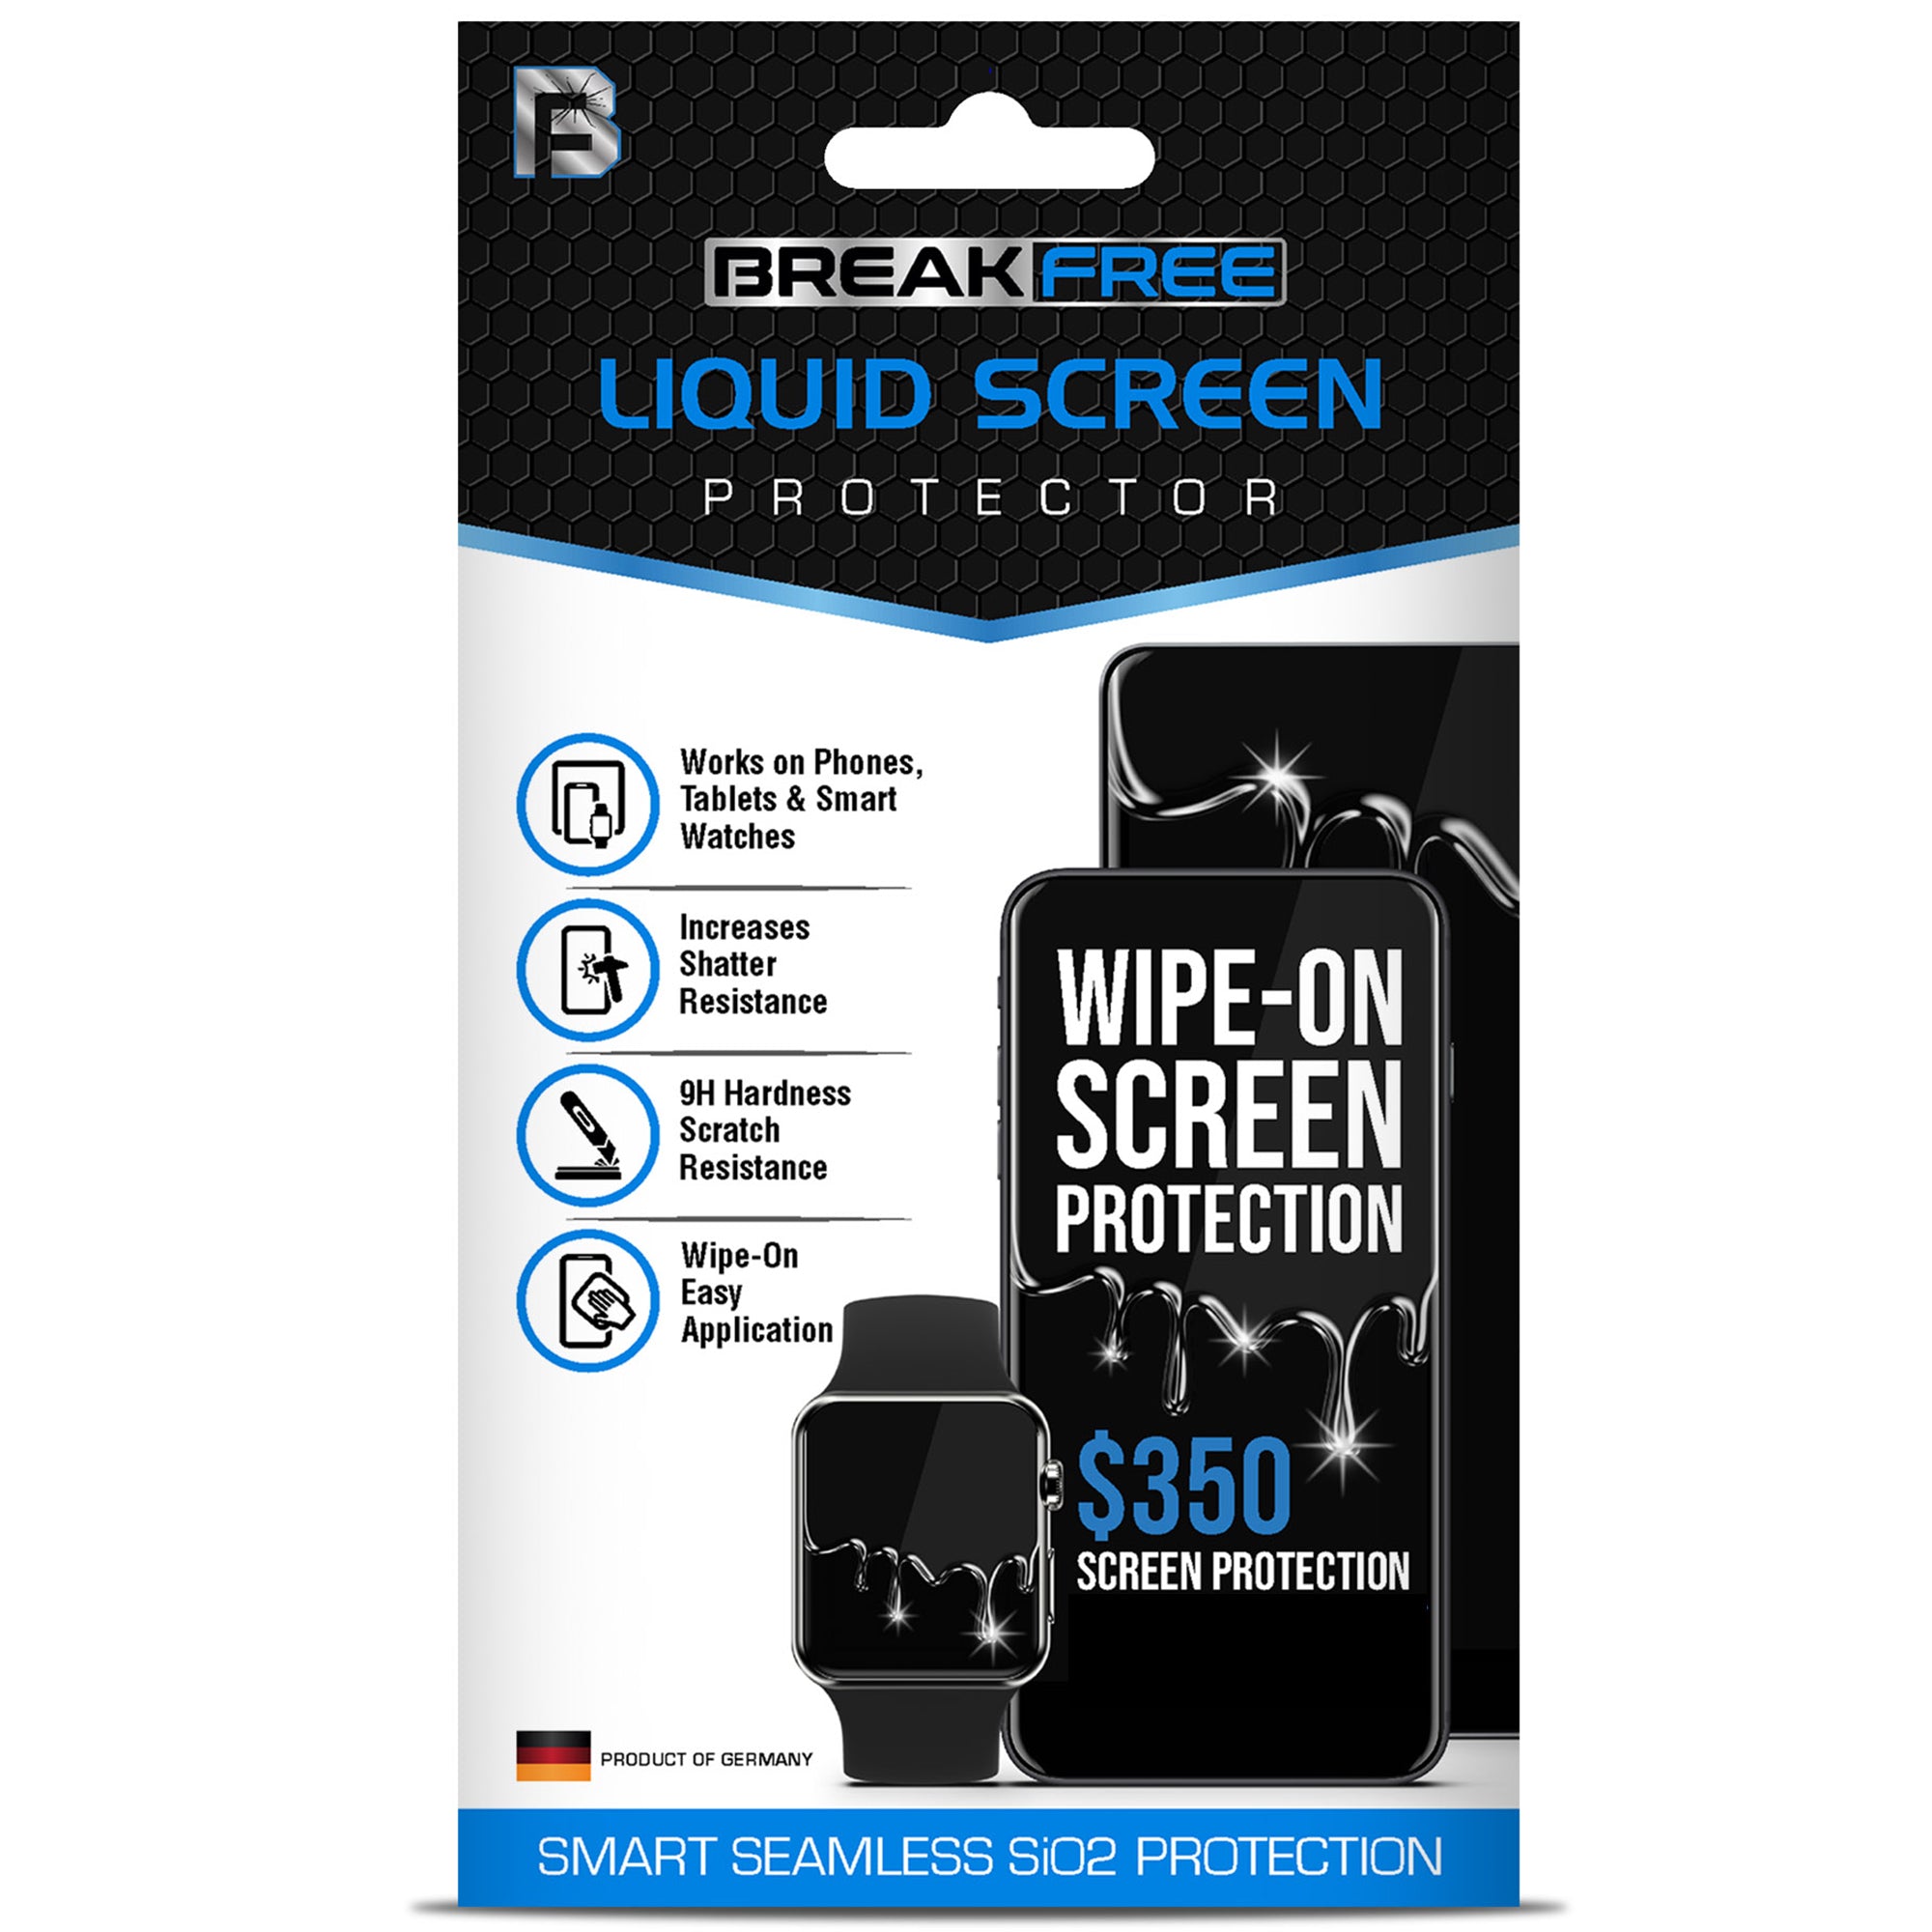 BREAK FREE Liquid Glass Screen Protector with $350 Guarantee for All Phones Tablets and Smart Watches